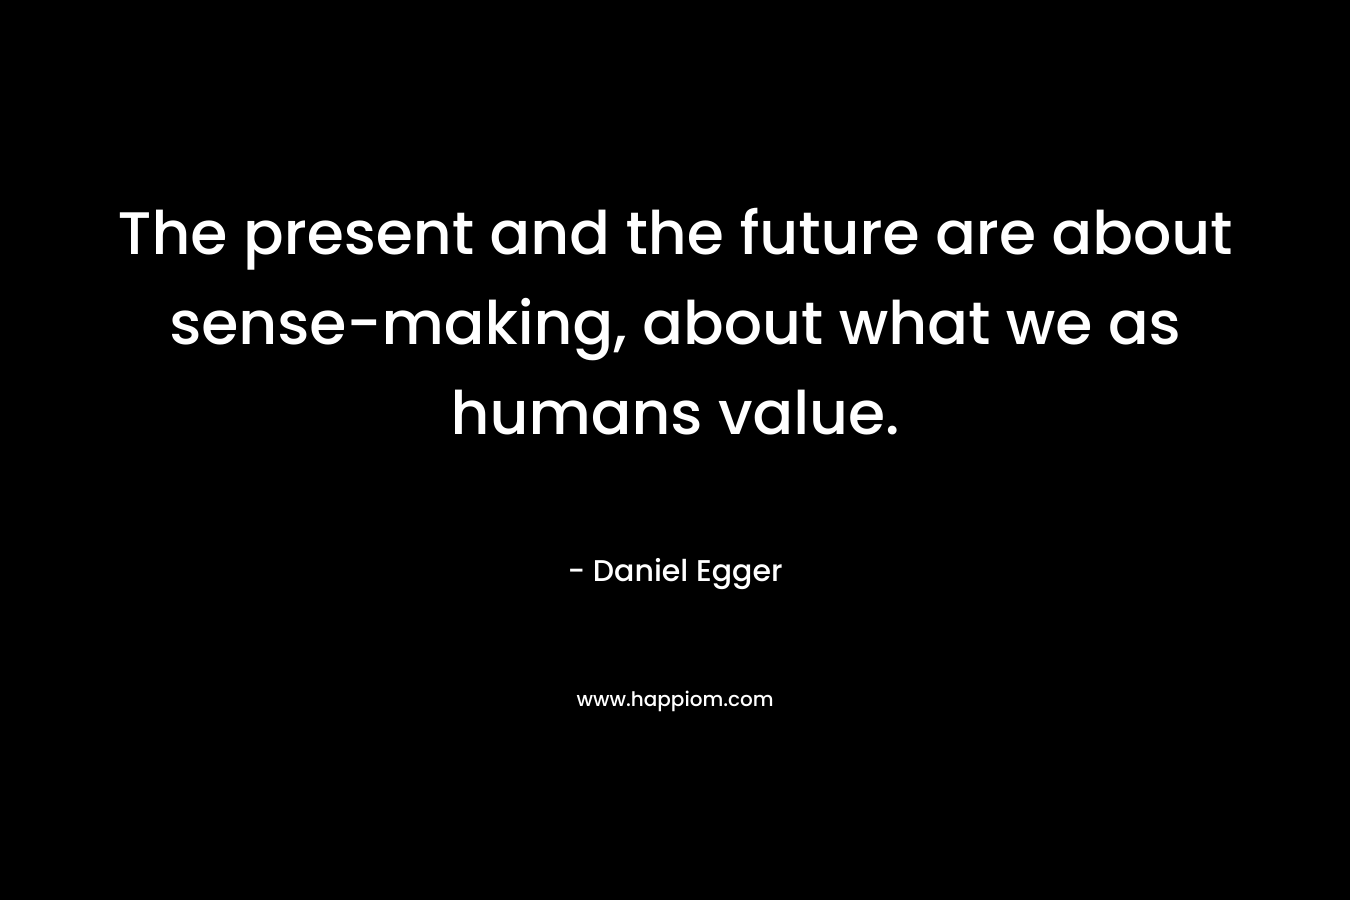 The present and the future are about sense-making, about what we as humans value.